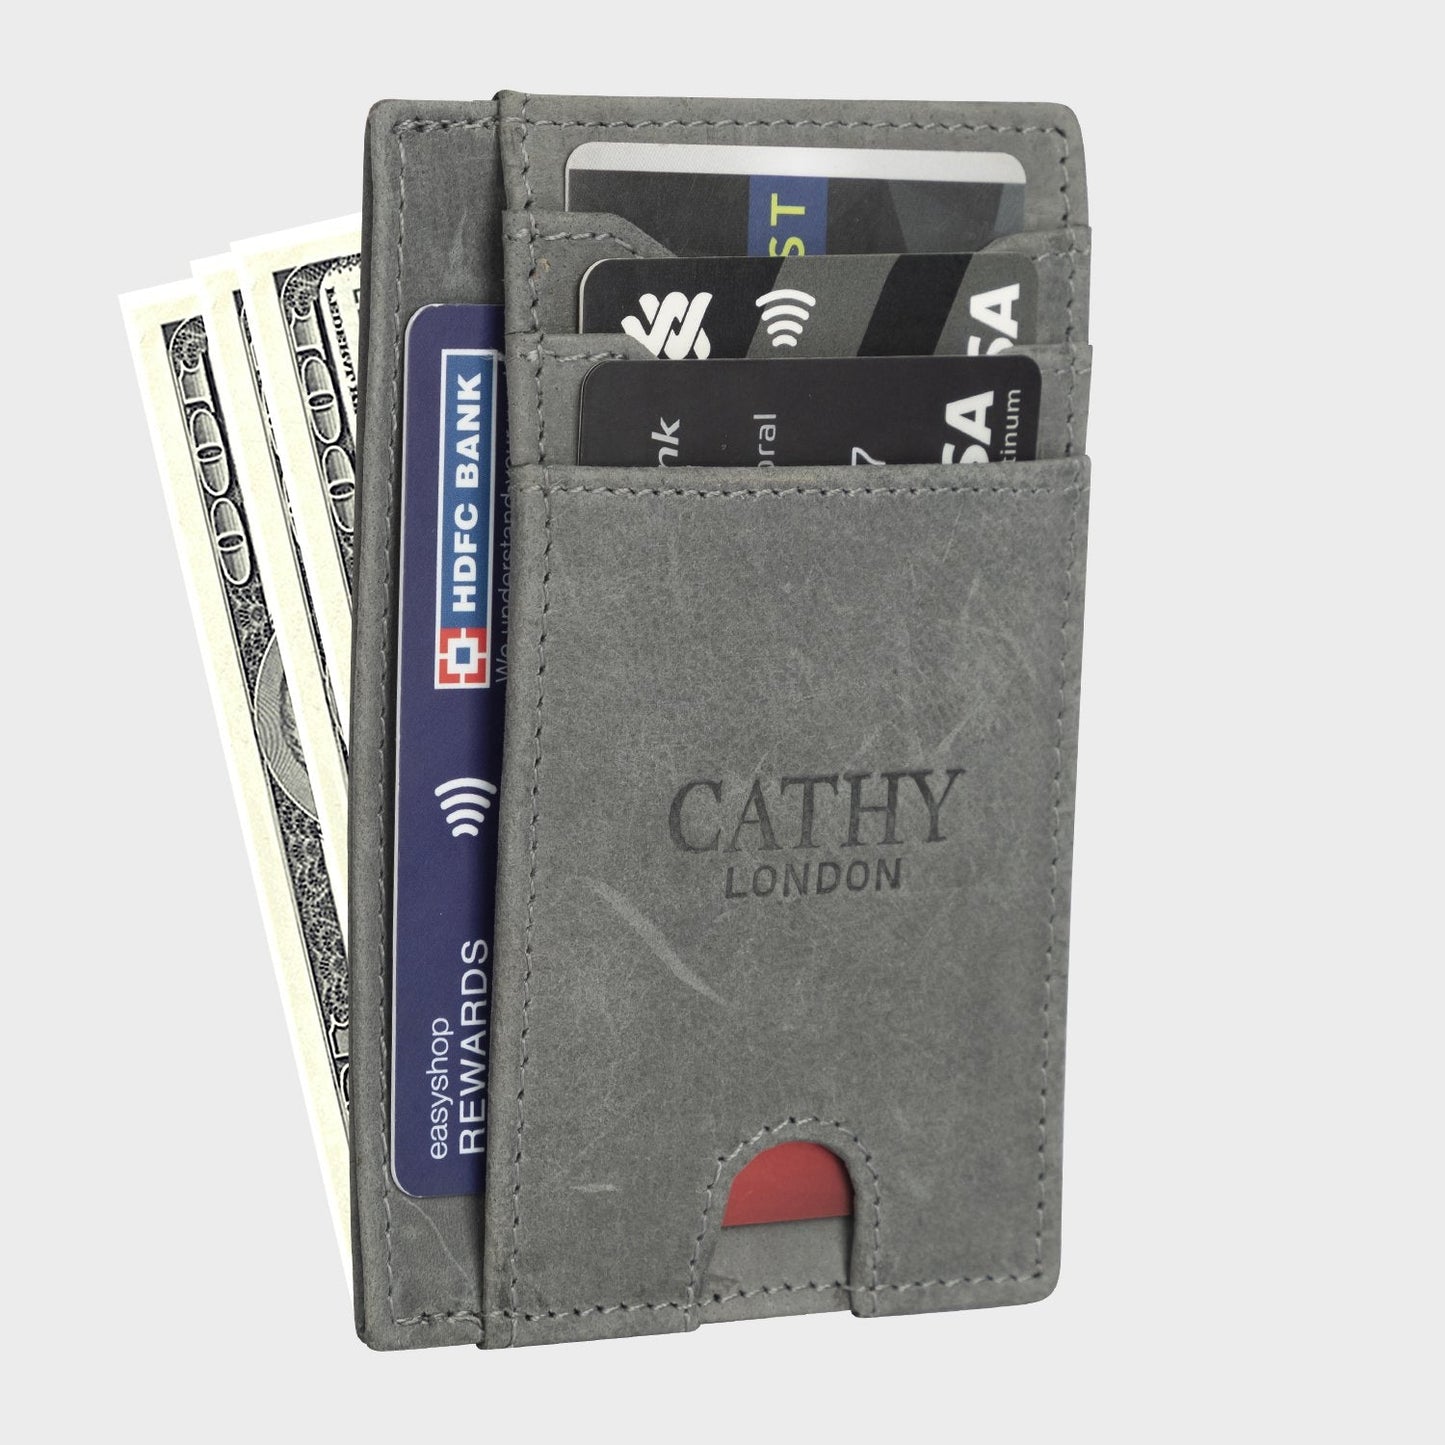 Grey Colour Italian Leather Slim Wallet/Card Holder (5 Card Slot + 1 ID Slot + Cash Compartment)